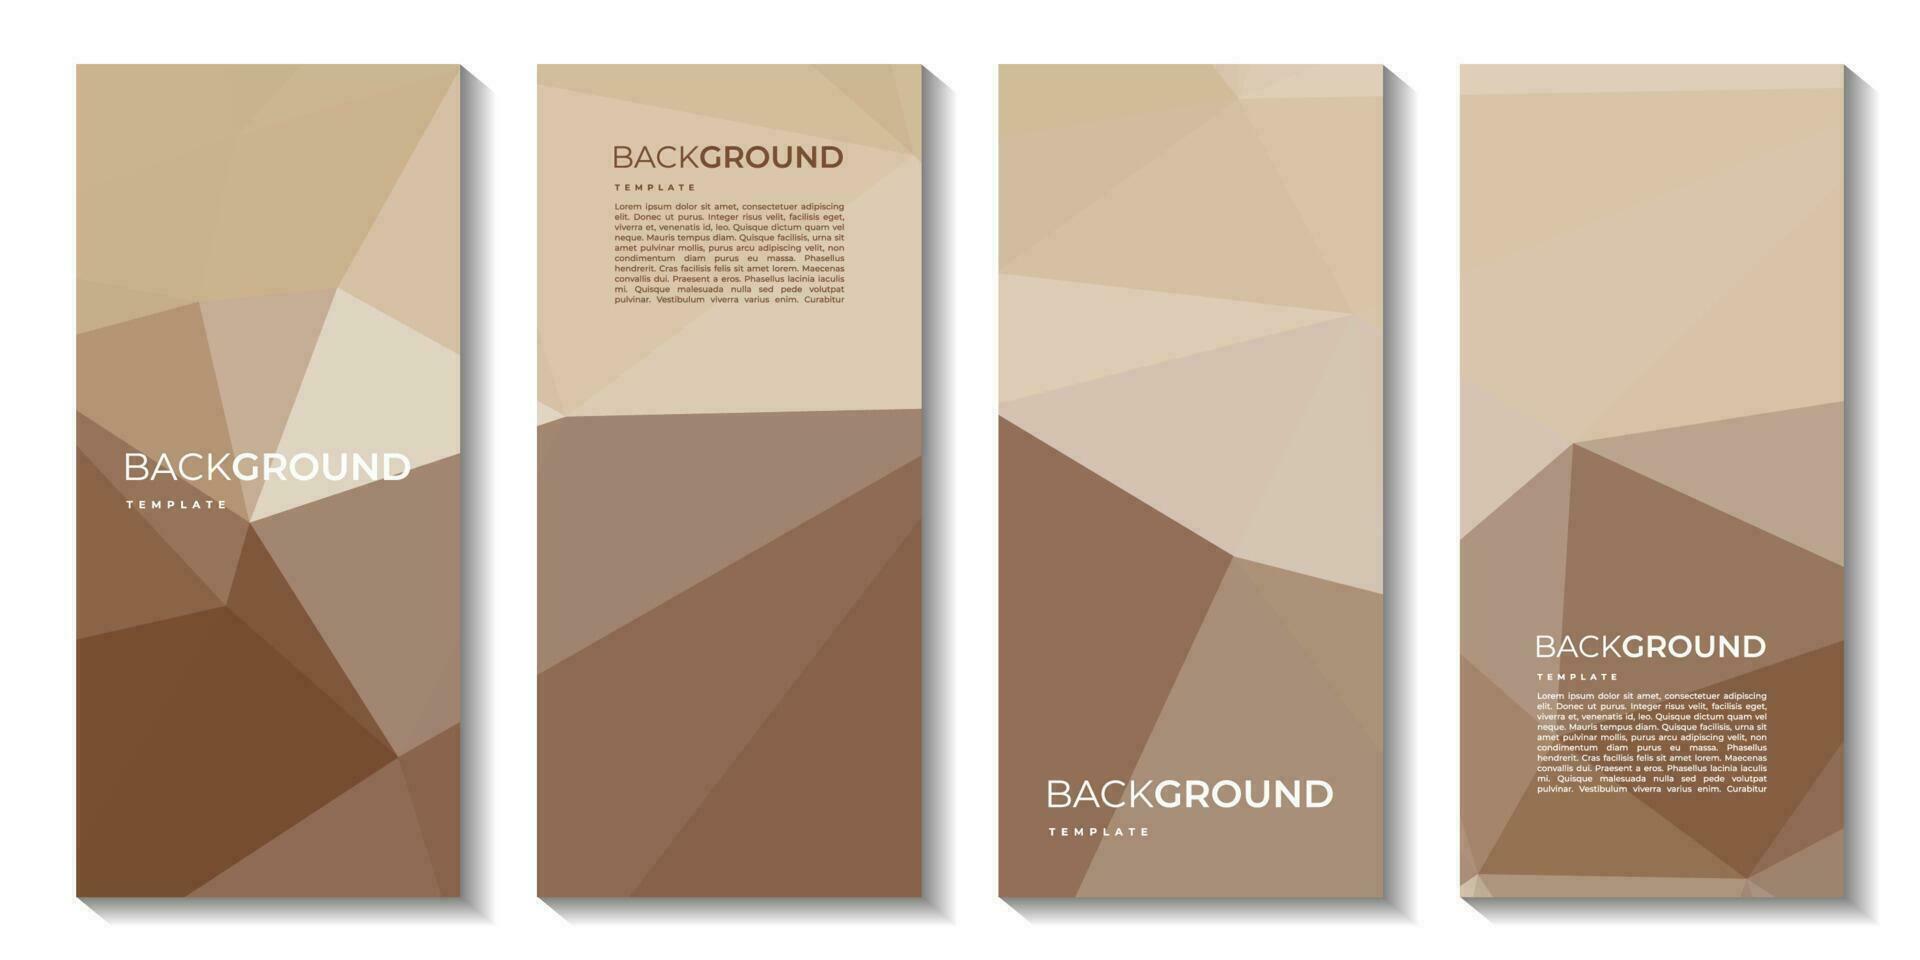 a set of brochure with colorful background. banners design. triangle shapes. lowpoly design. vector